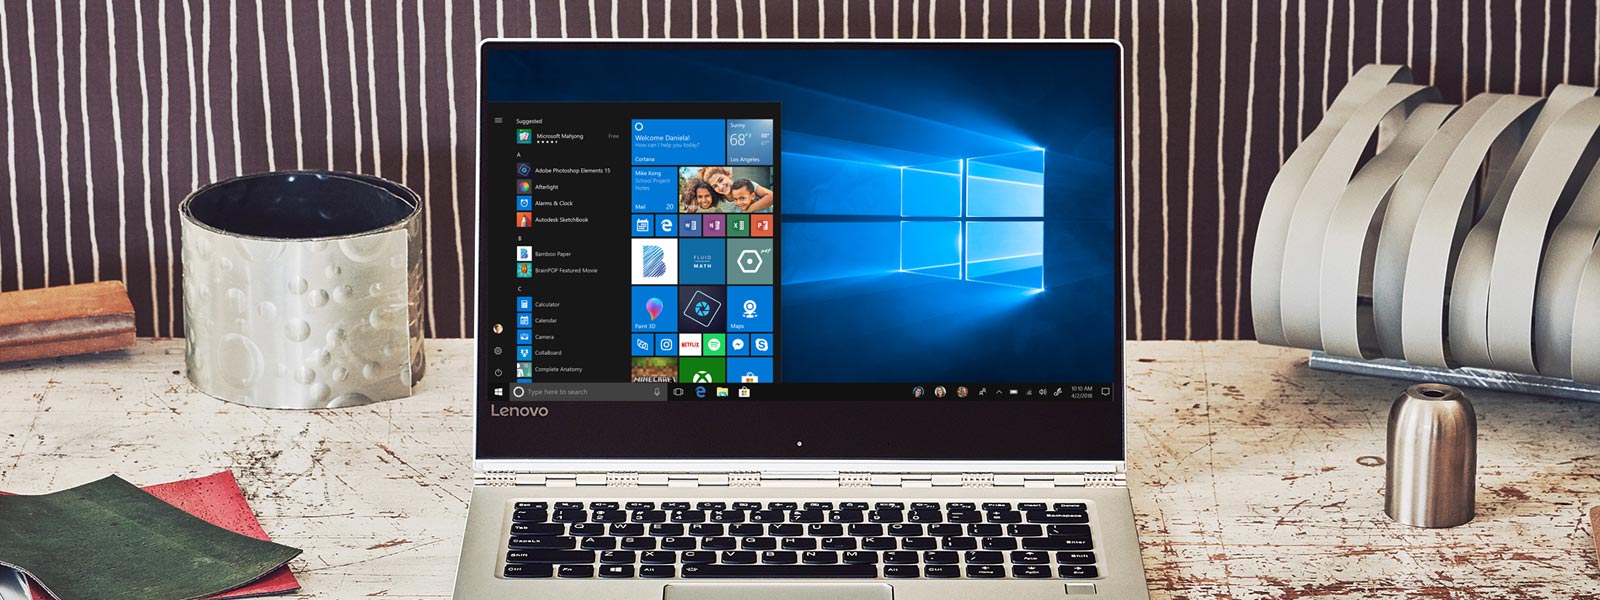 How to Turn off Windows 10’s Built-in Advertising